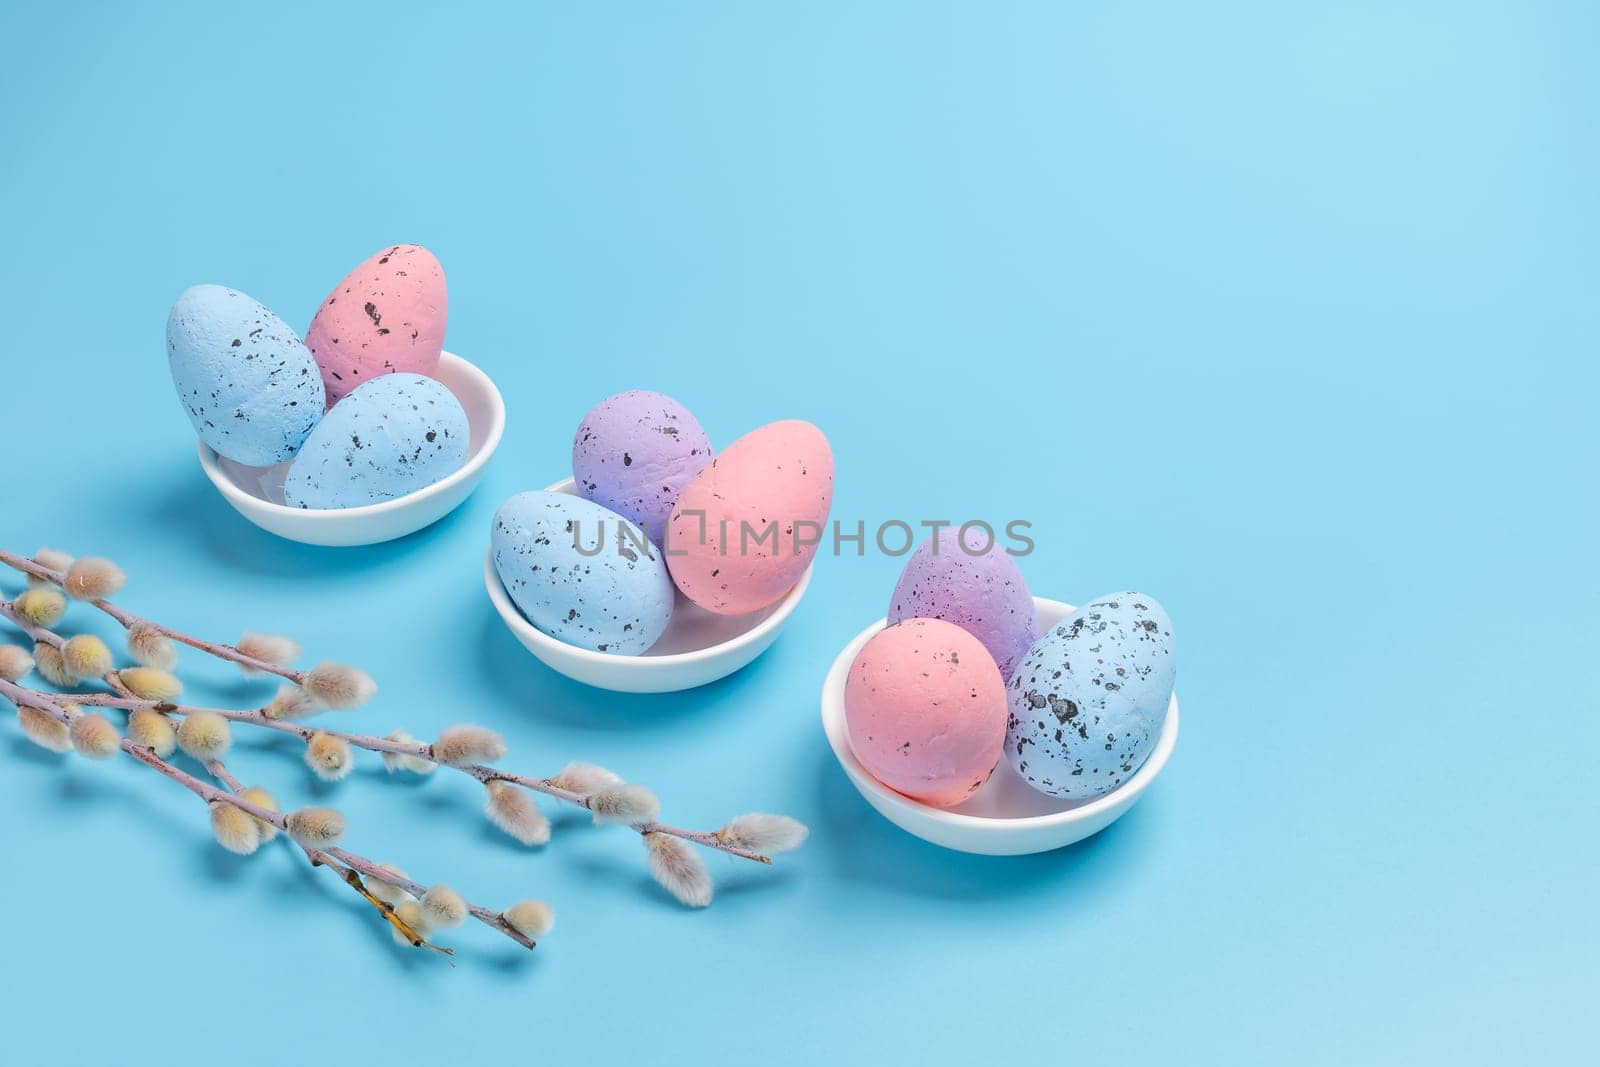 Porcelain saucers with colored Easter eggs and willow branches with catkins on the blue background. Top view.